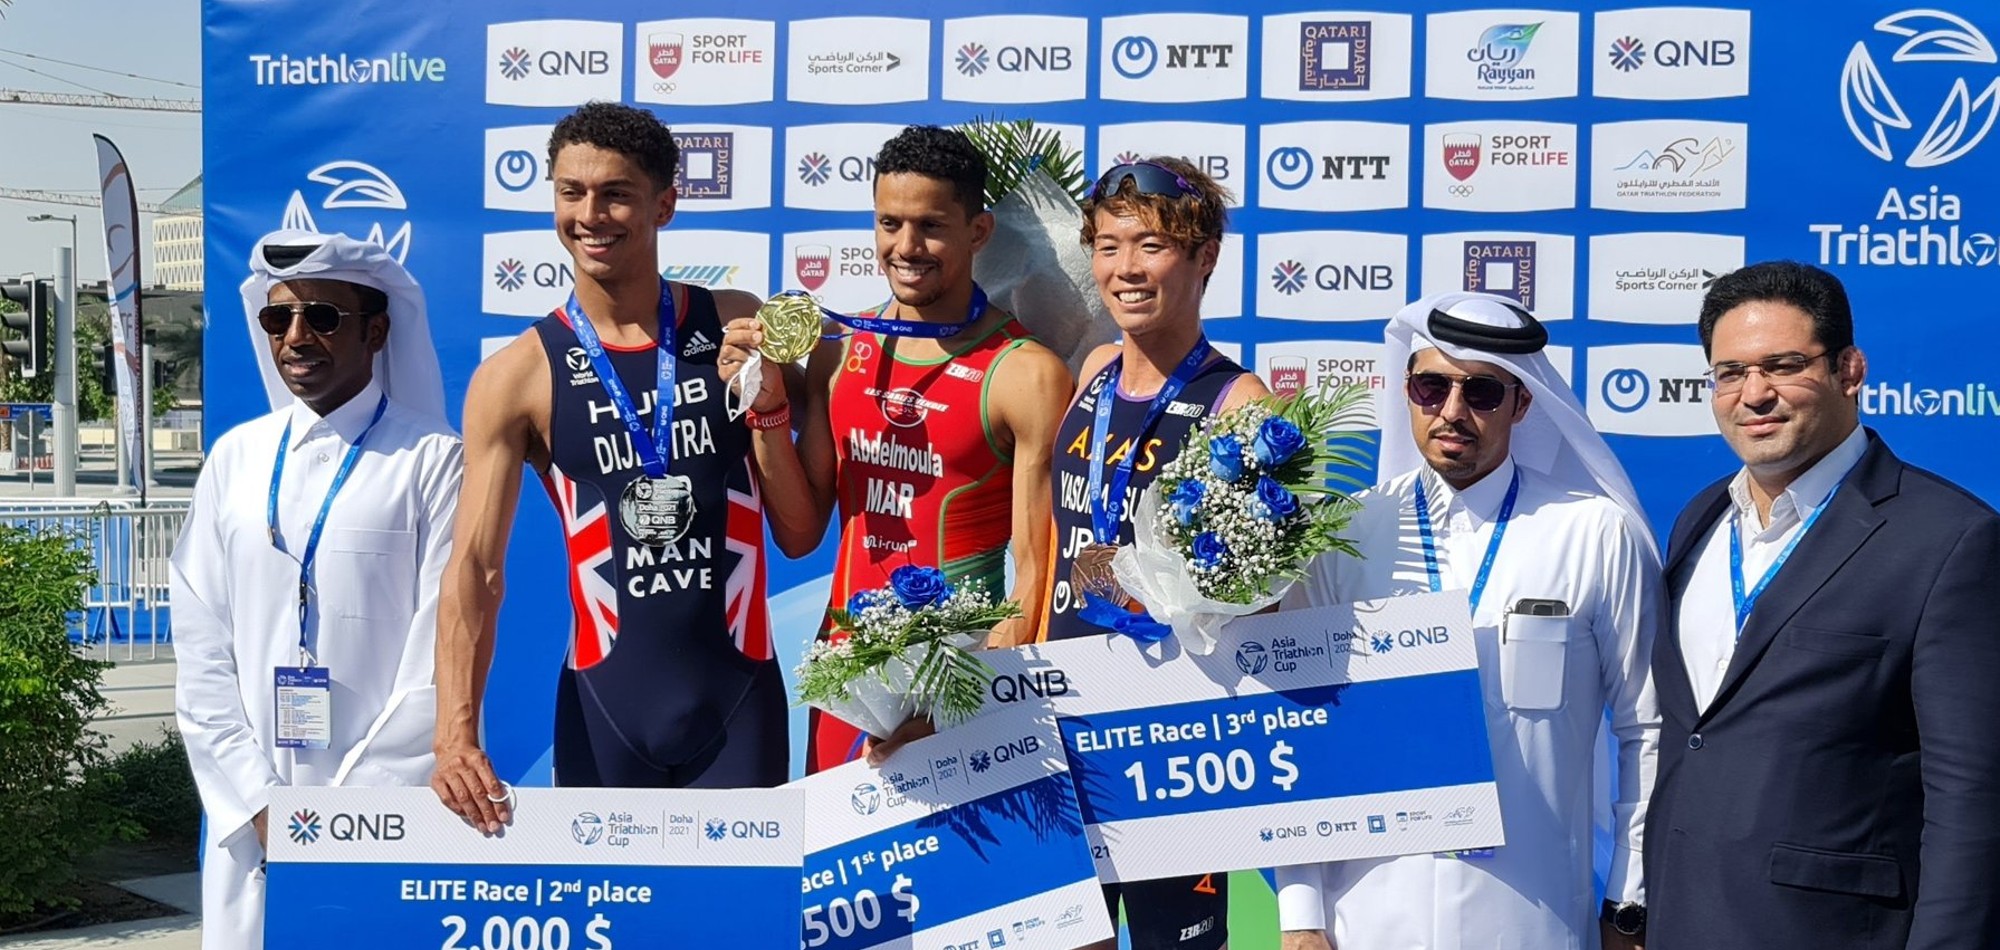 Weekend of Asia Triathlon Cup Doha 2021 concludes at Lusail Marina